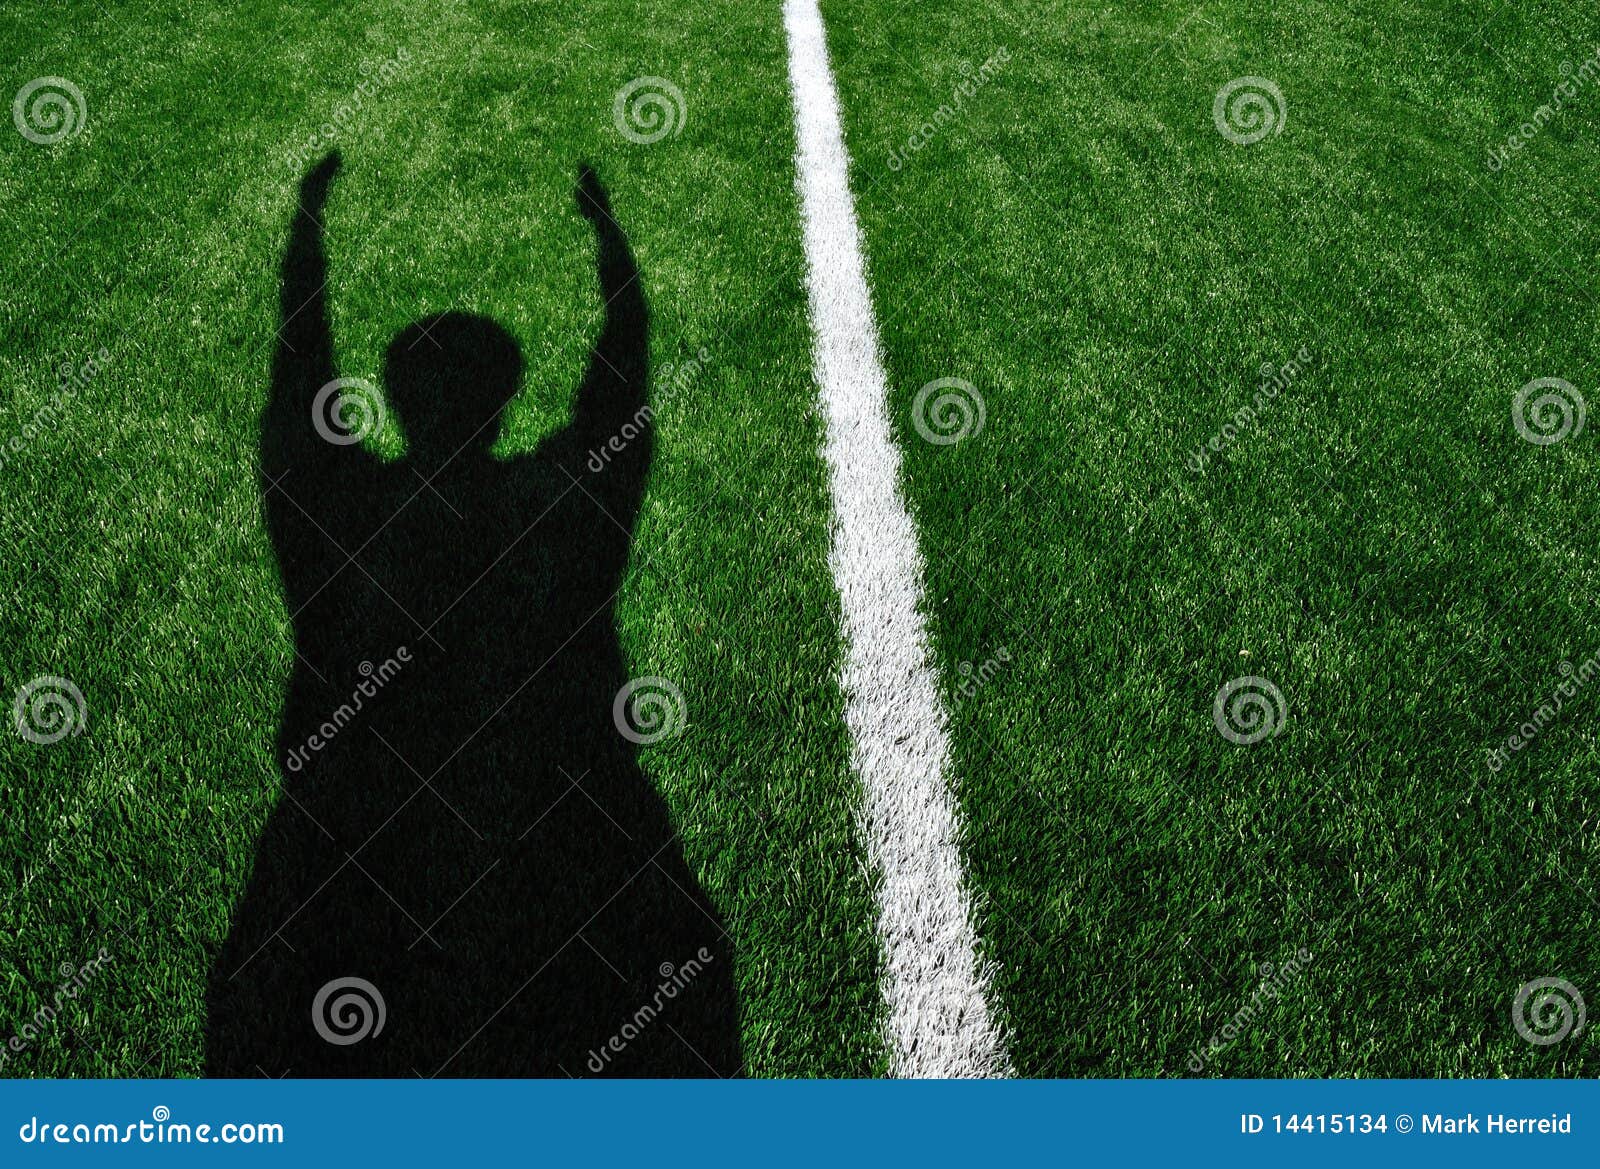 shadow of american football referee touchdown